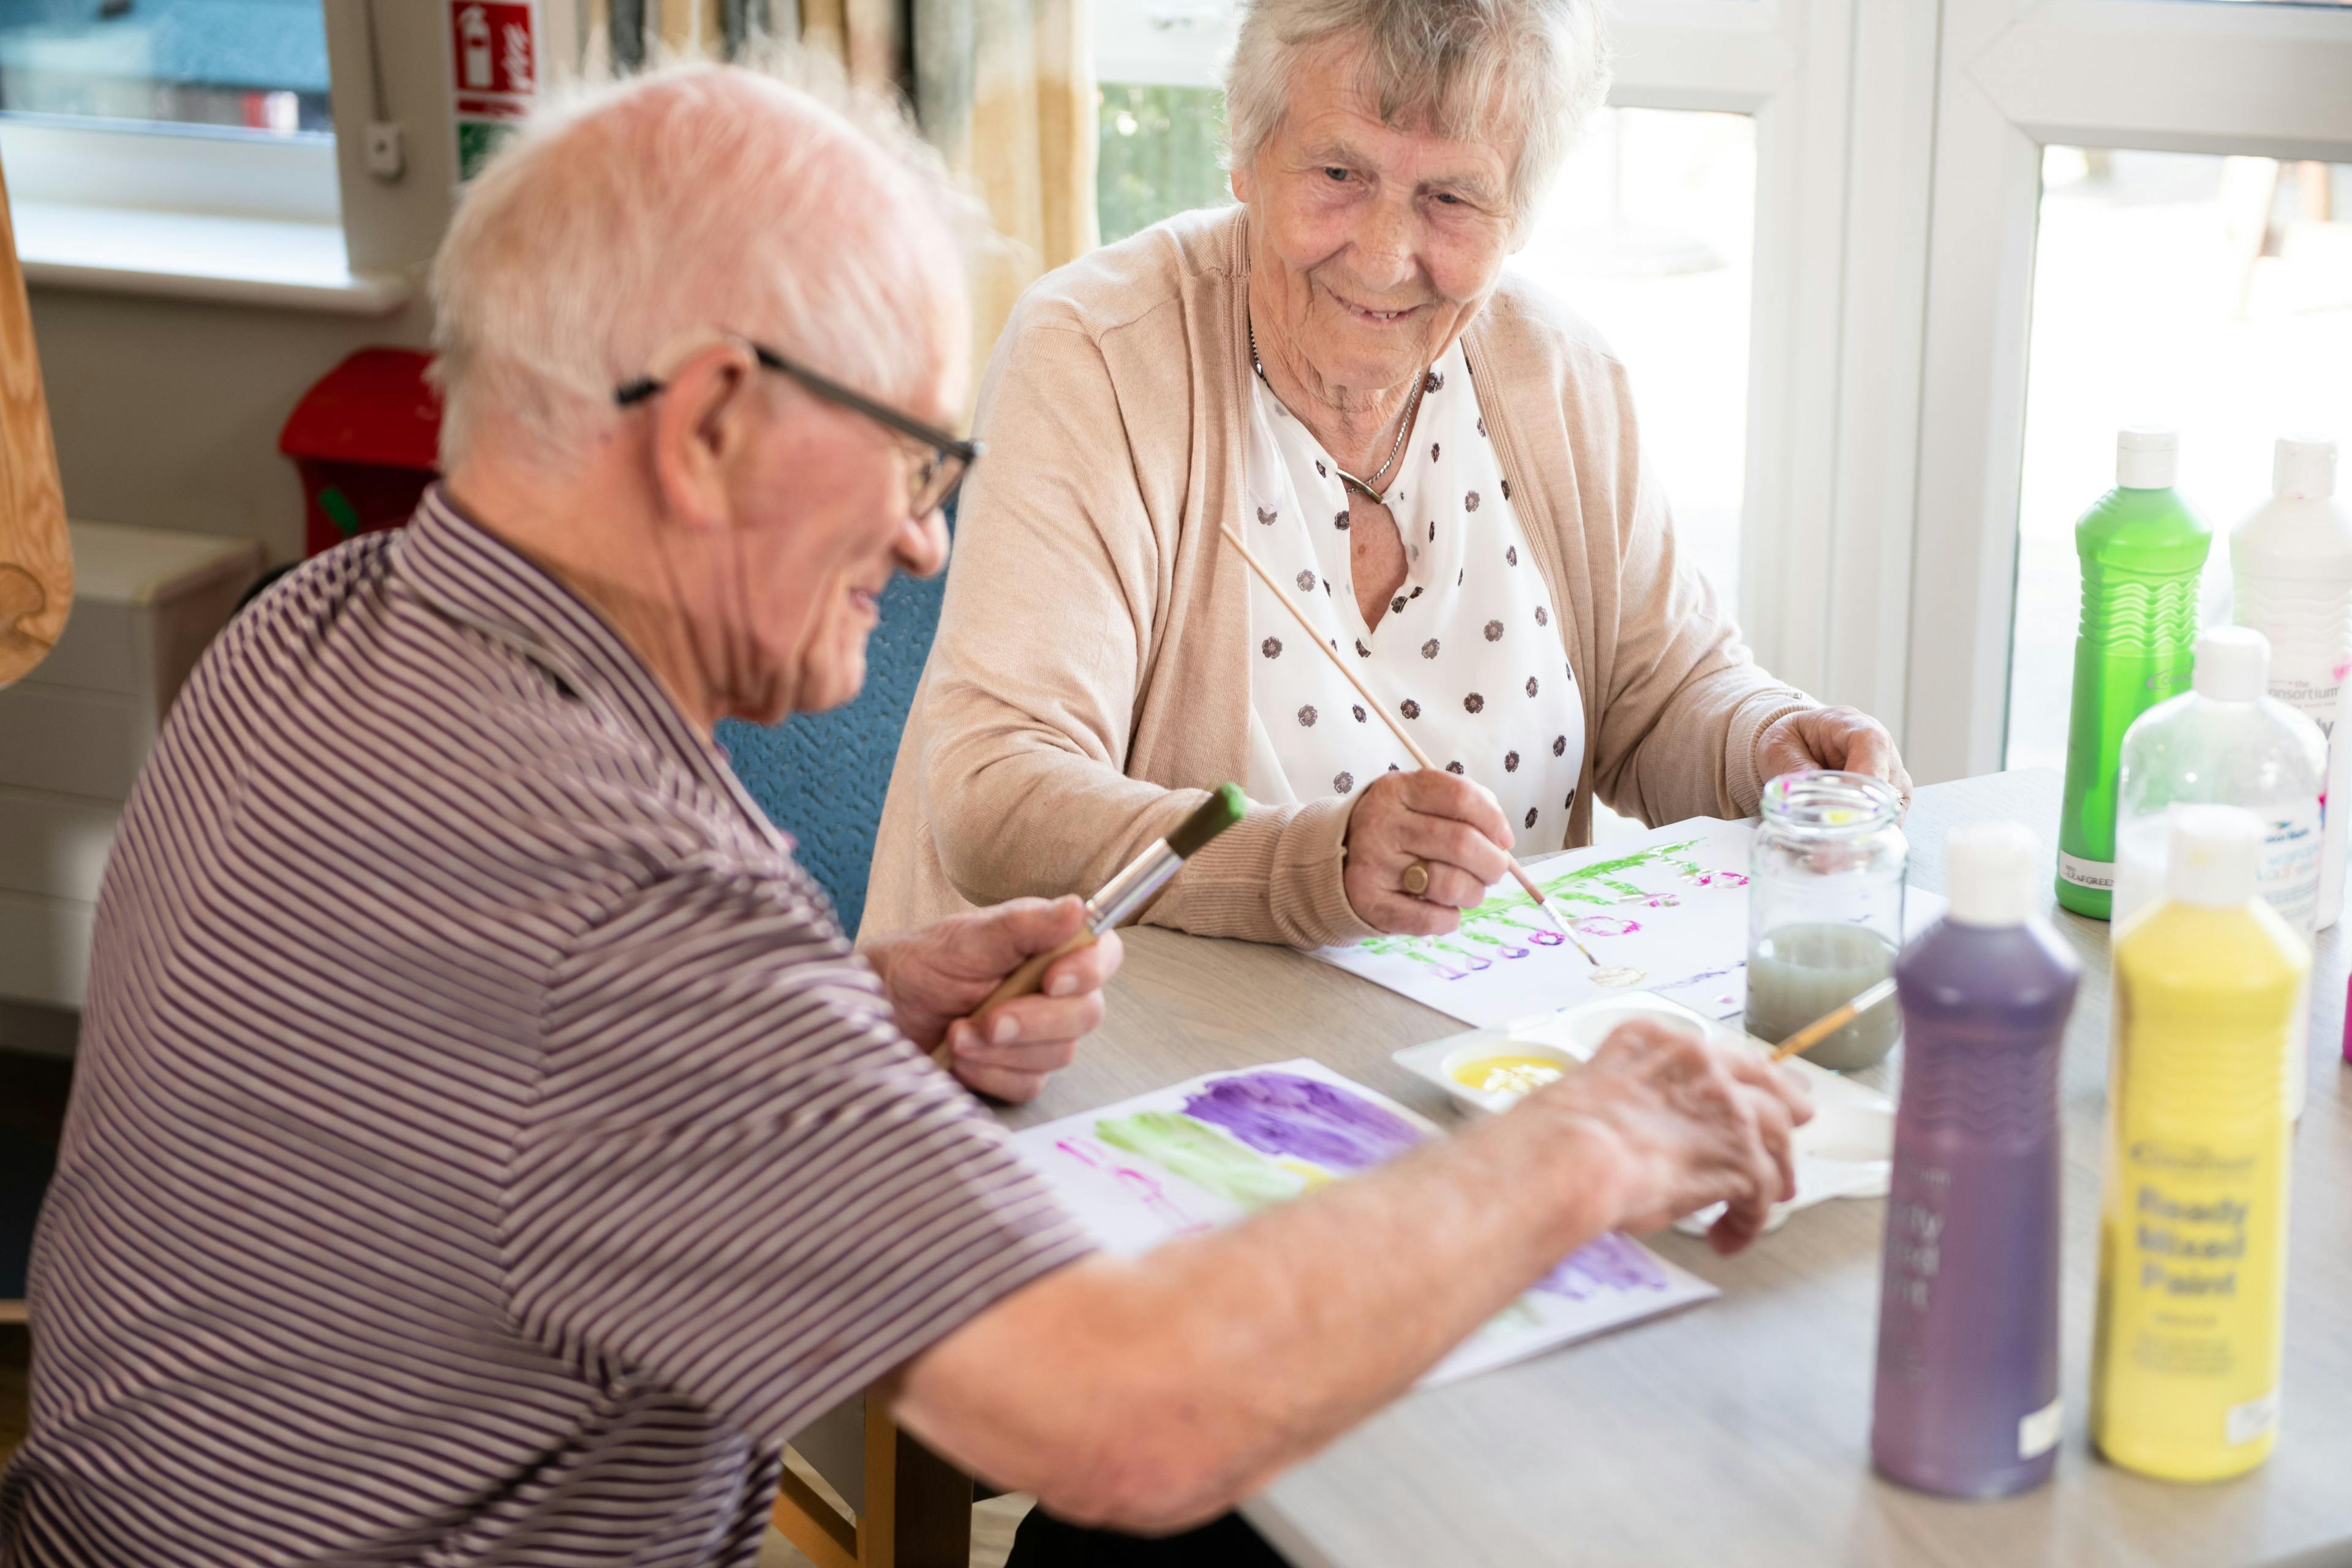 Residents at Alex Wood House Care home in Cambridge, Cambridgeshire